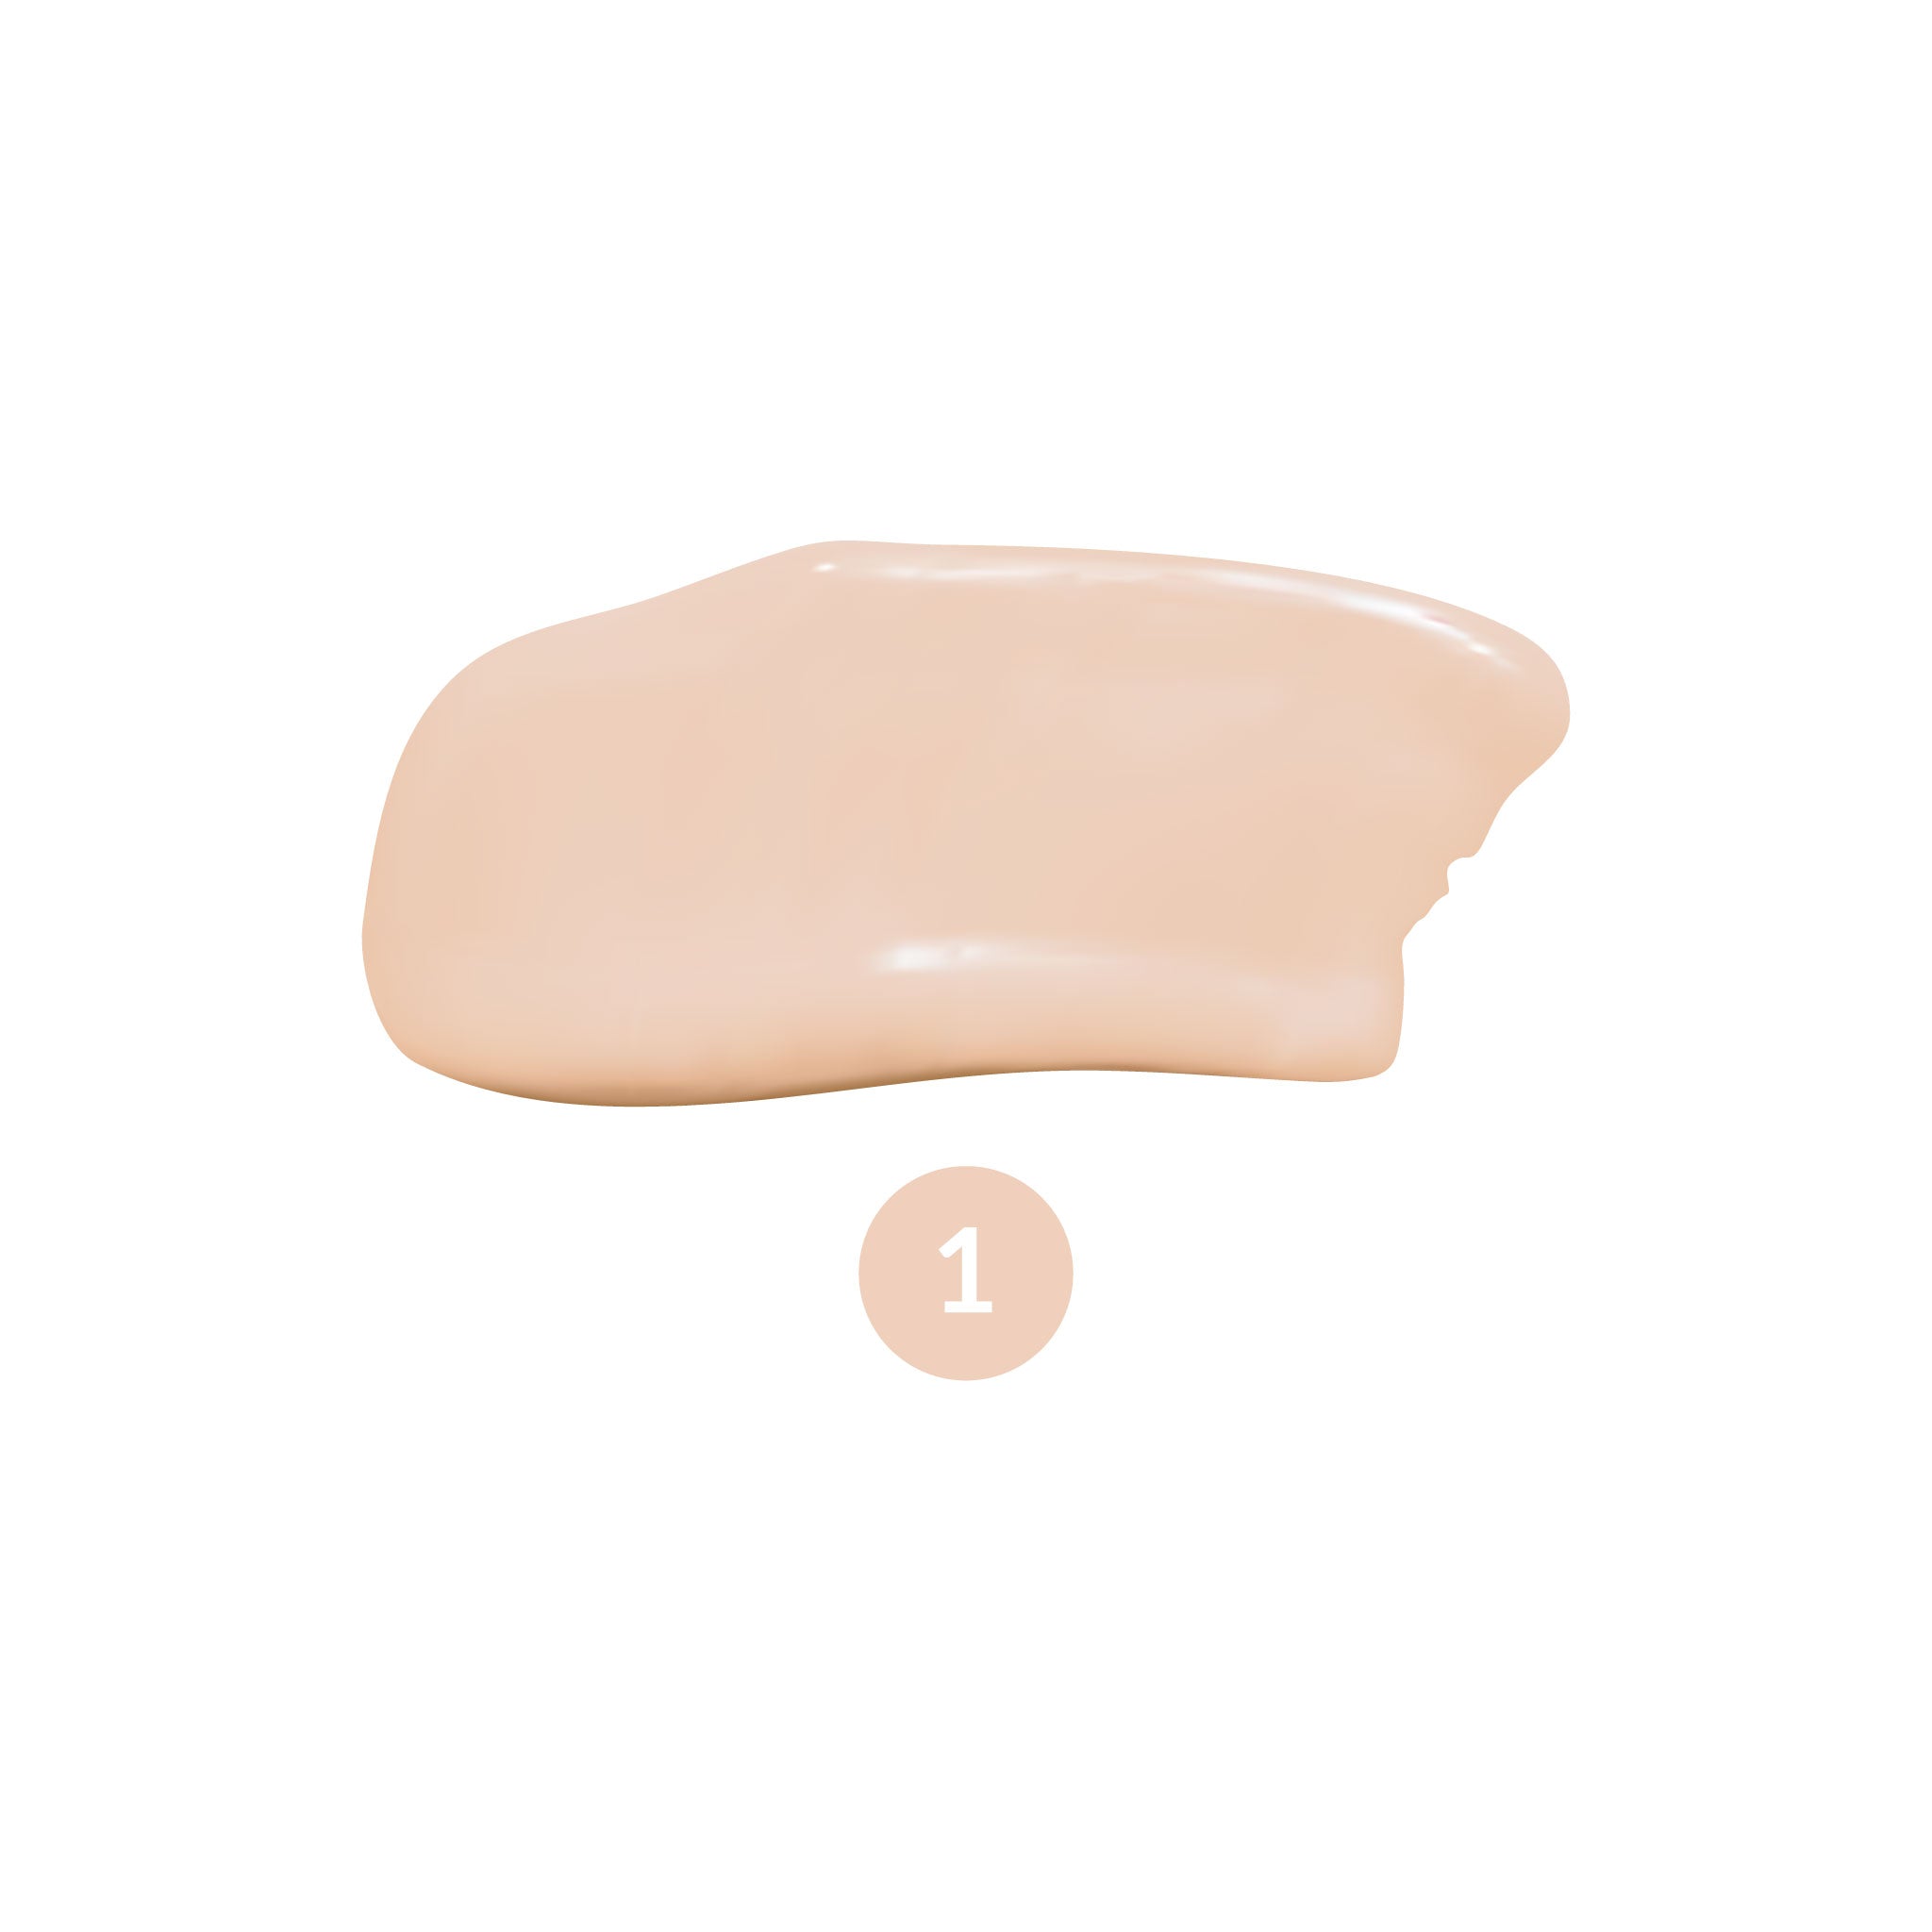 withSimplicity Liquid Foundation Swatch Shade 1